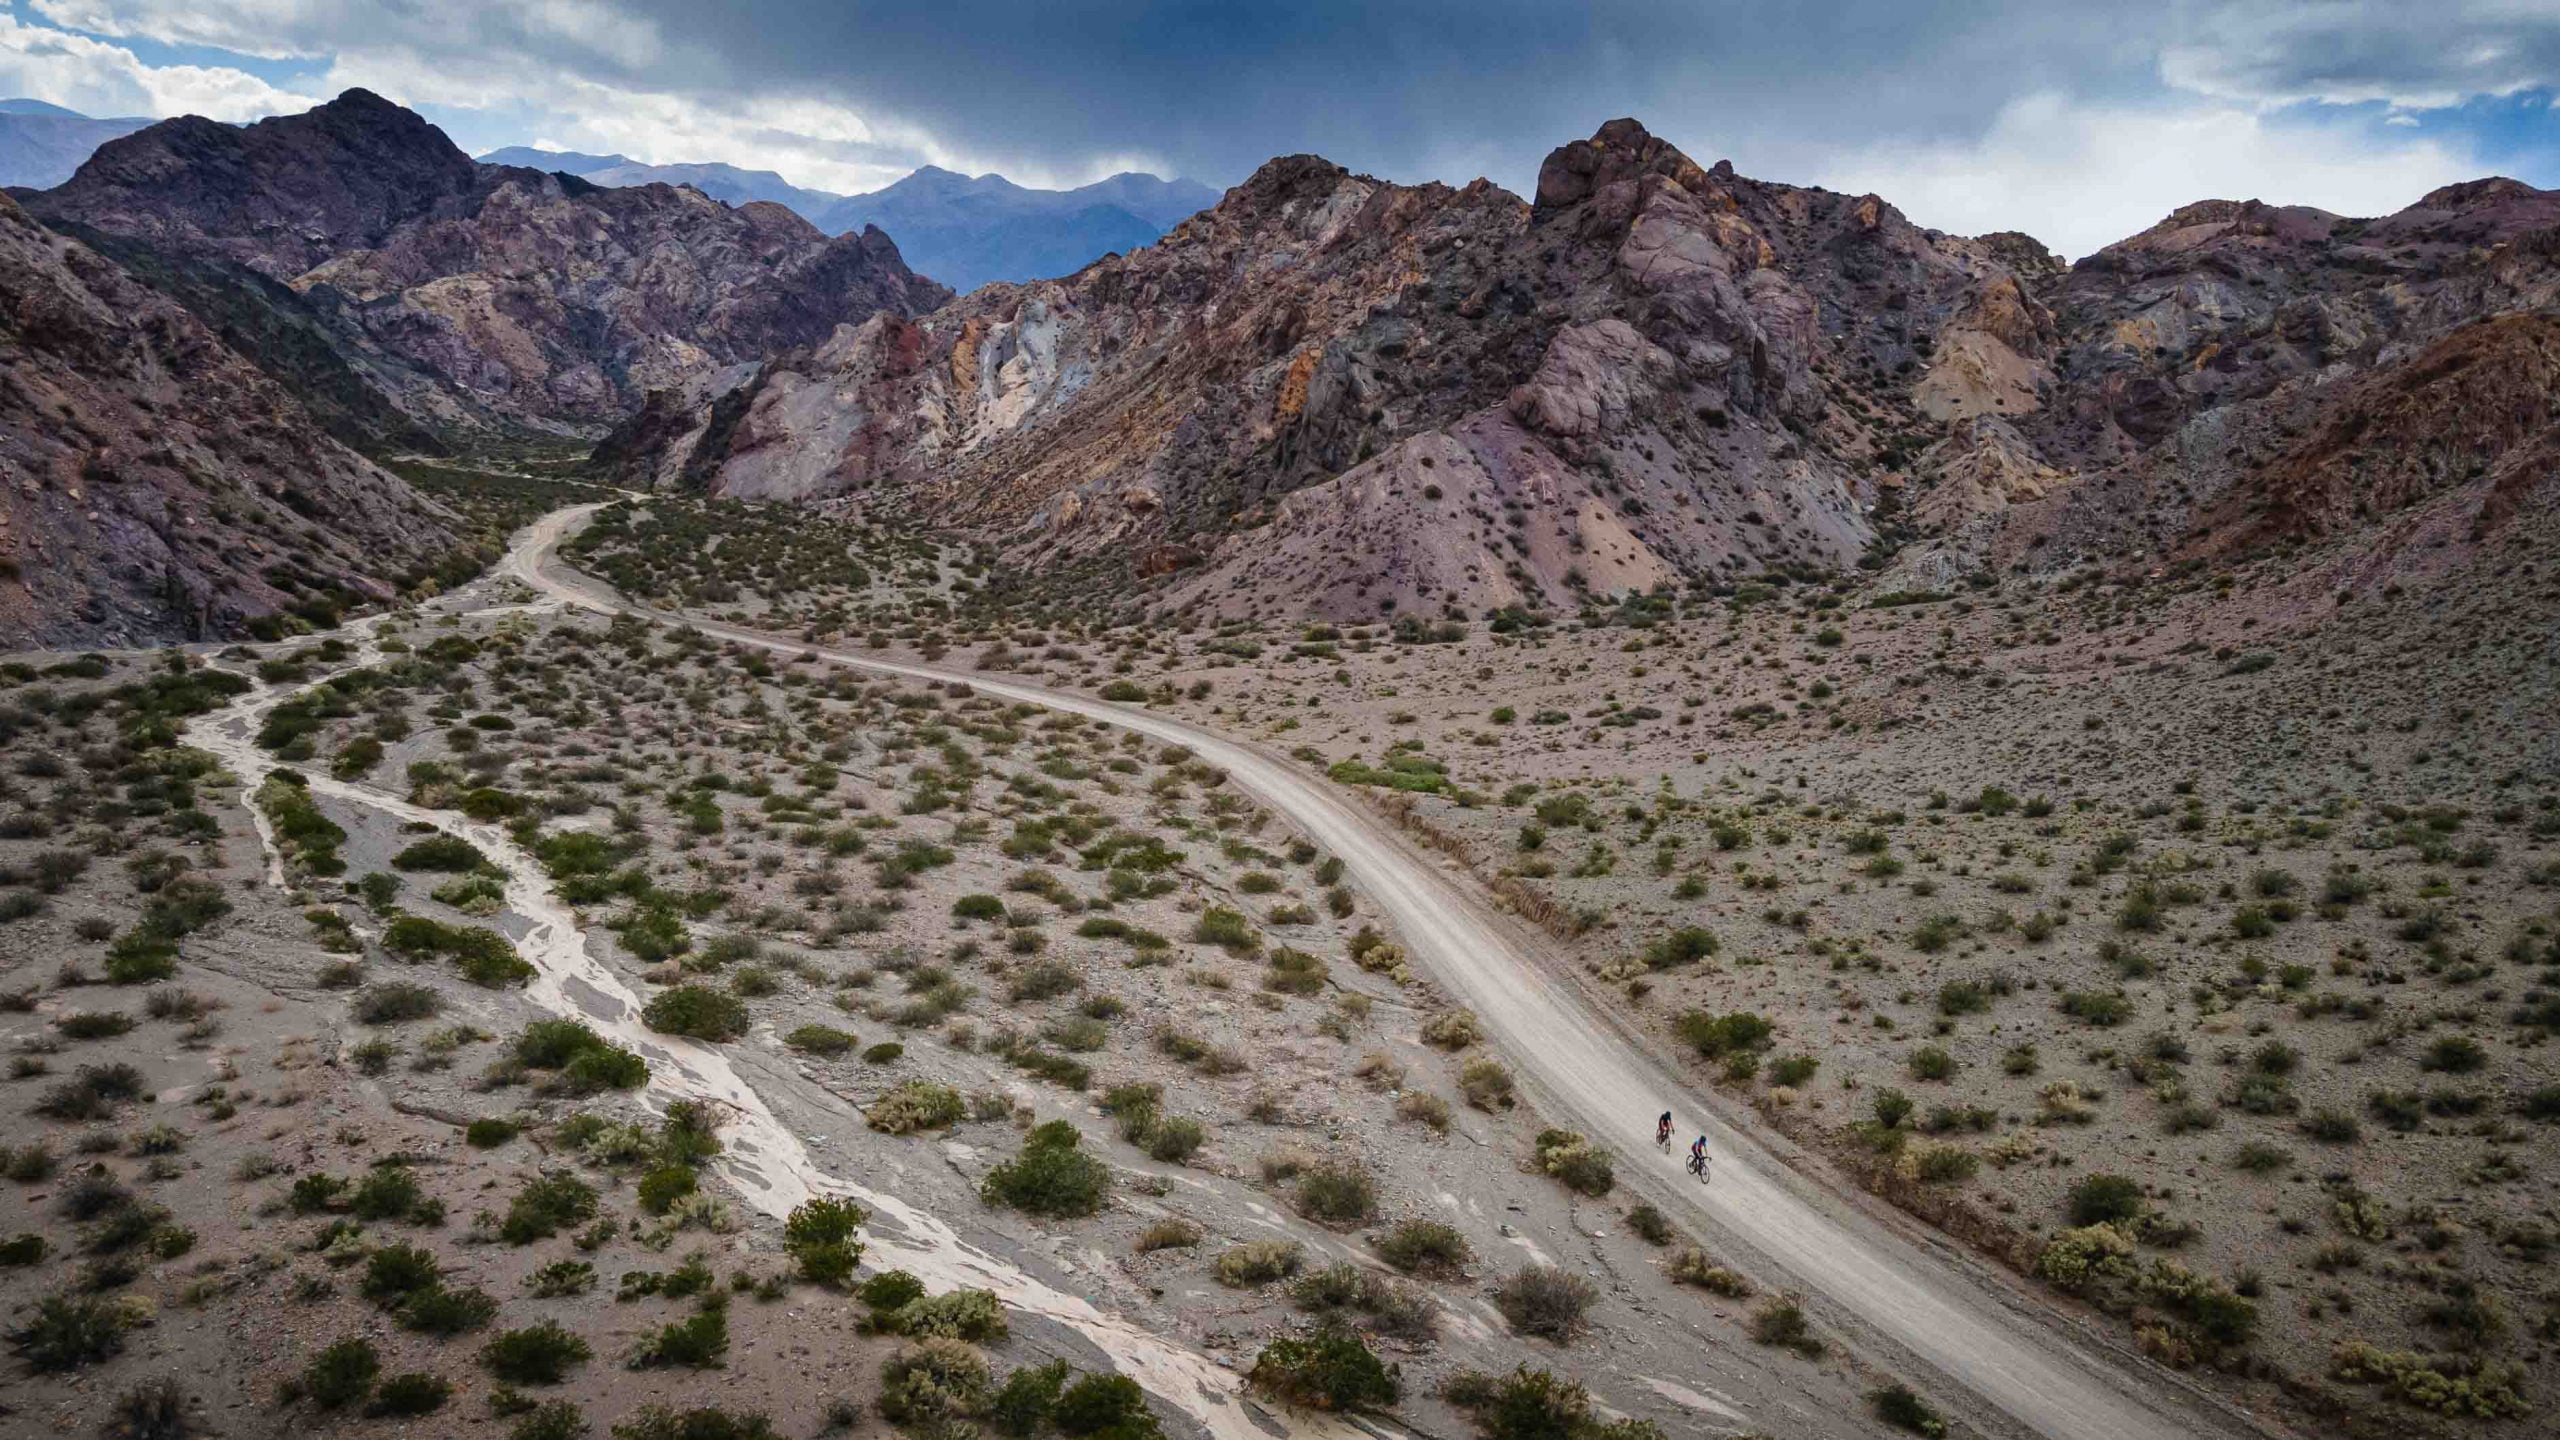 Cycling through the Andes desert landscapes